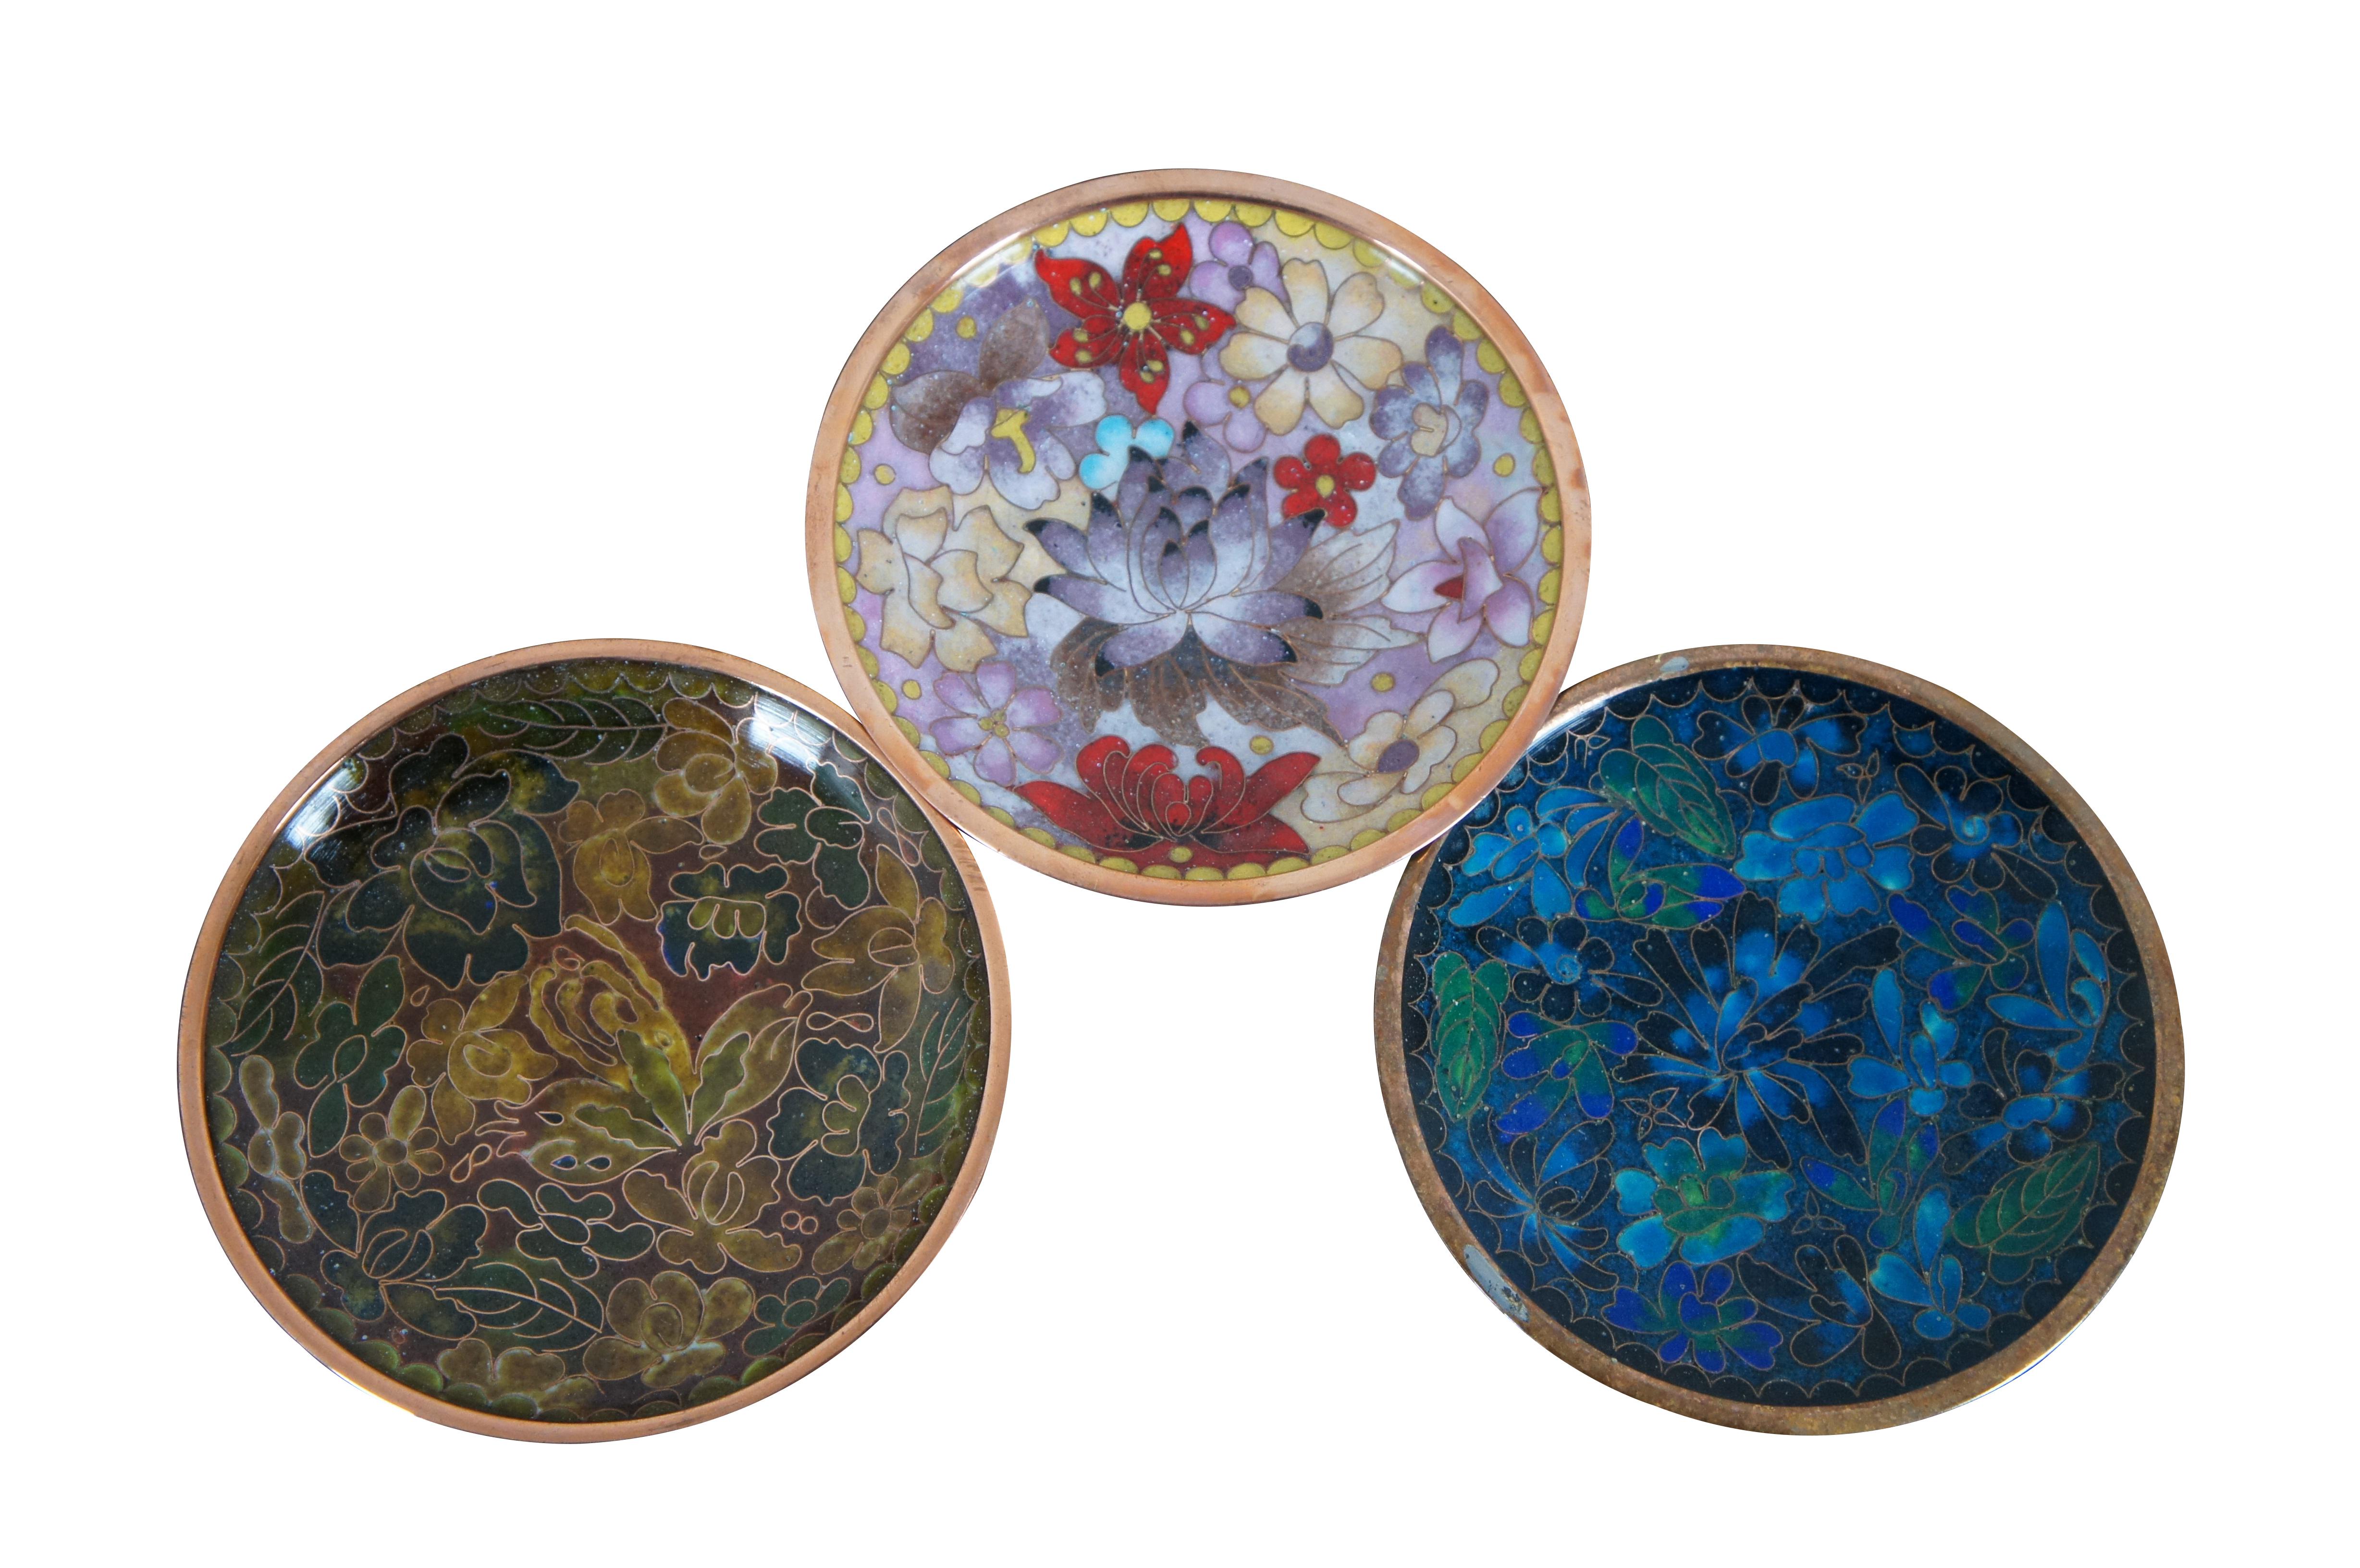 Set of 5 early 20th century Chinese cloisonne enamel trinket dishes / plates in a variety of colorful floral patterns and sizes.

Dimensions:
Large - 4